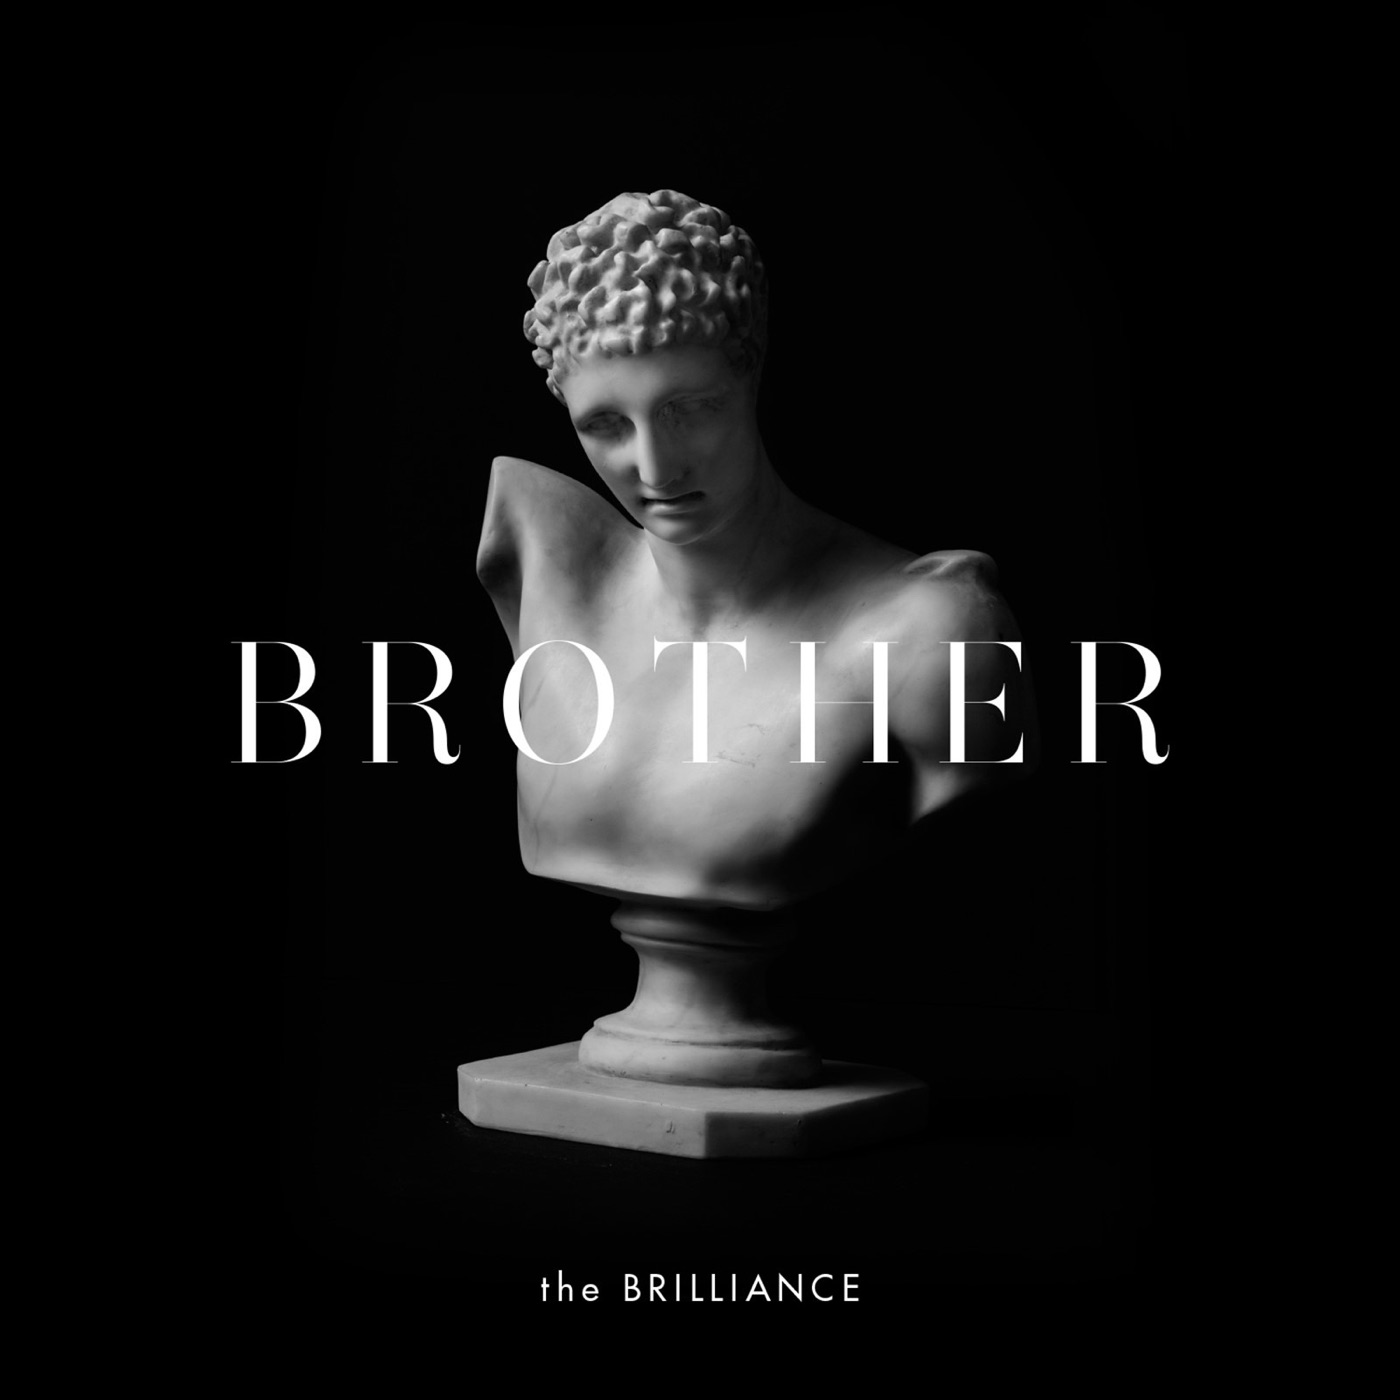 Brother by The Brilliance